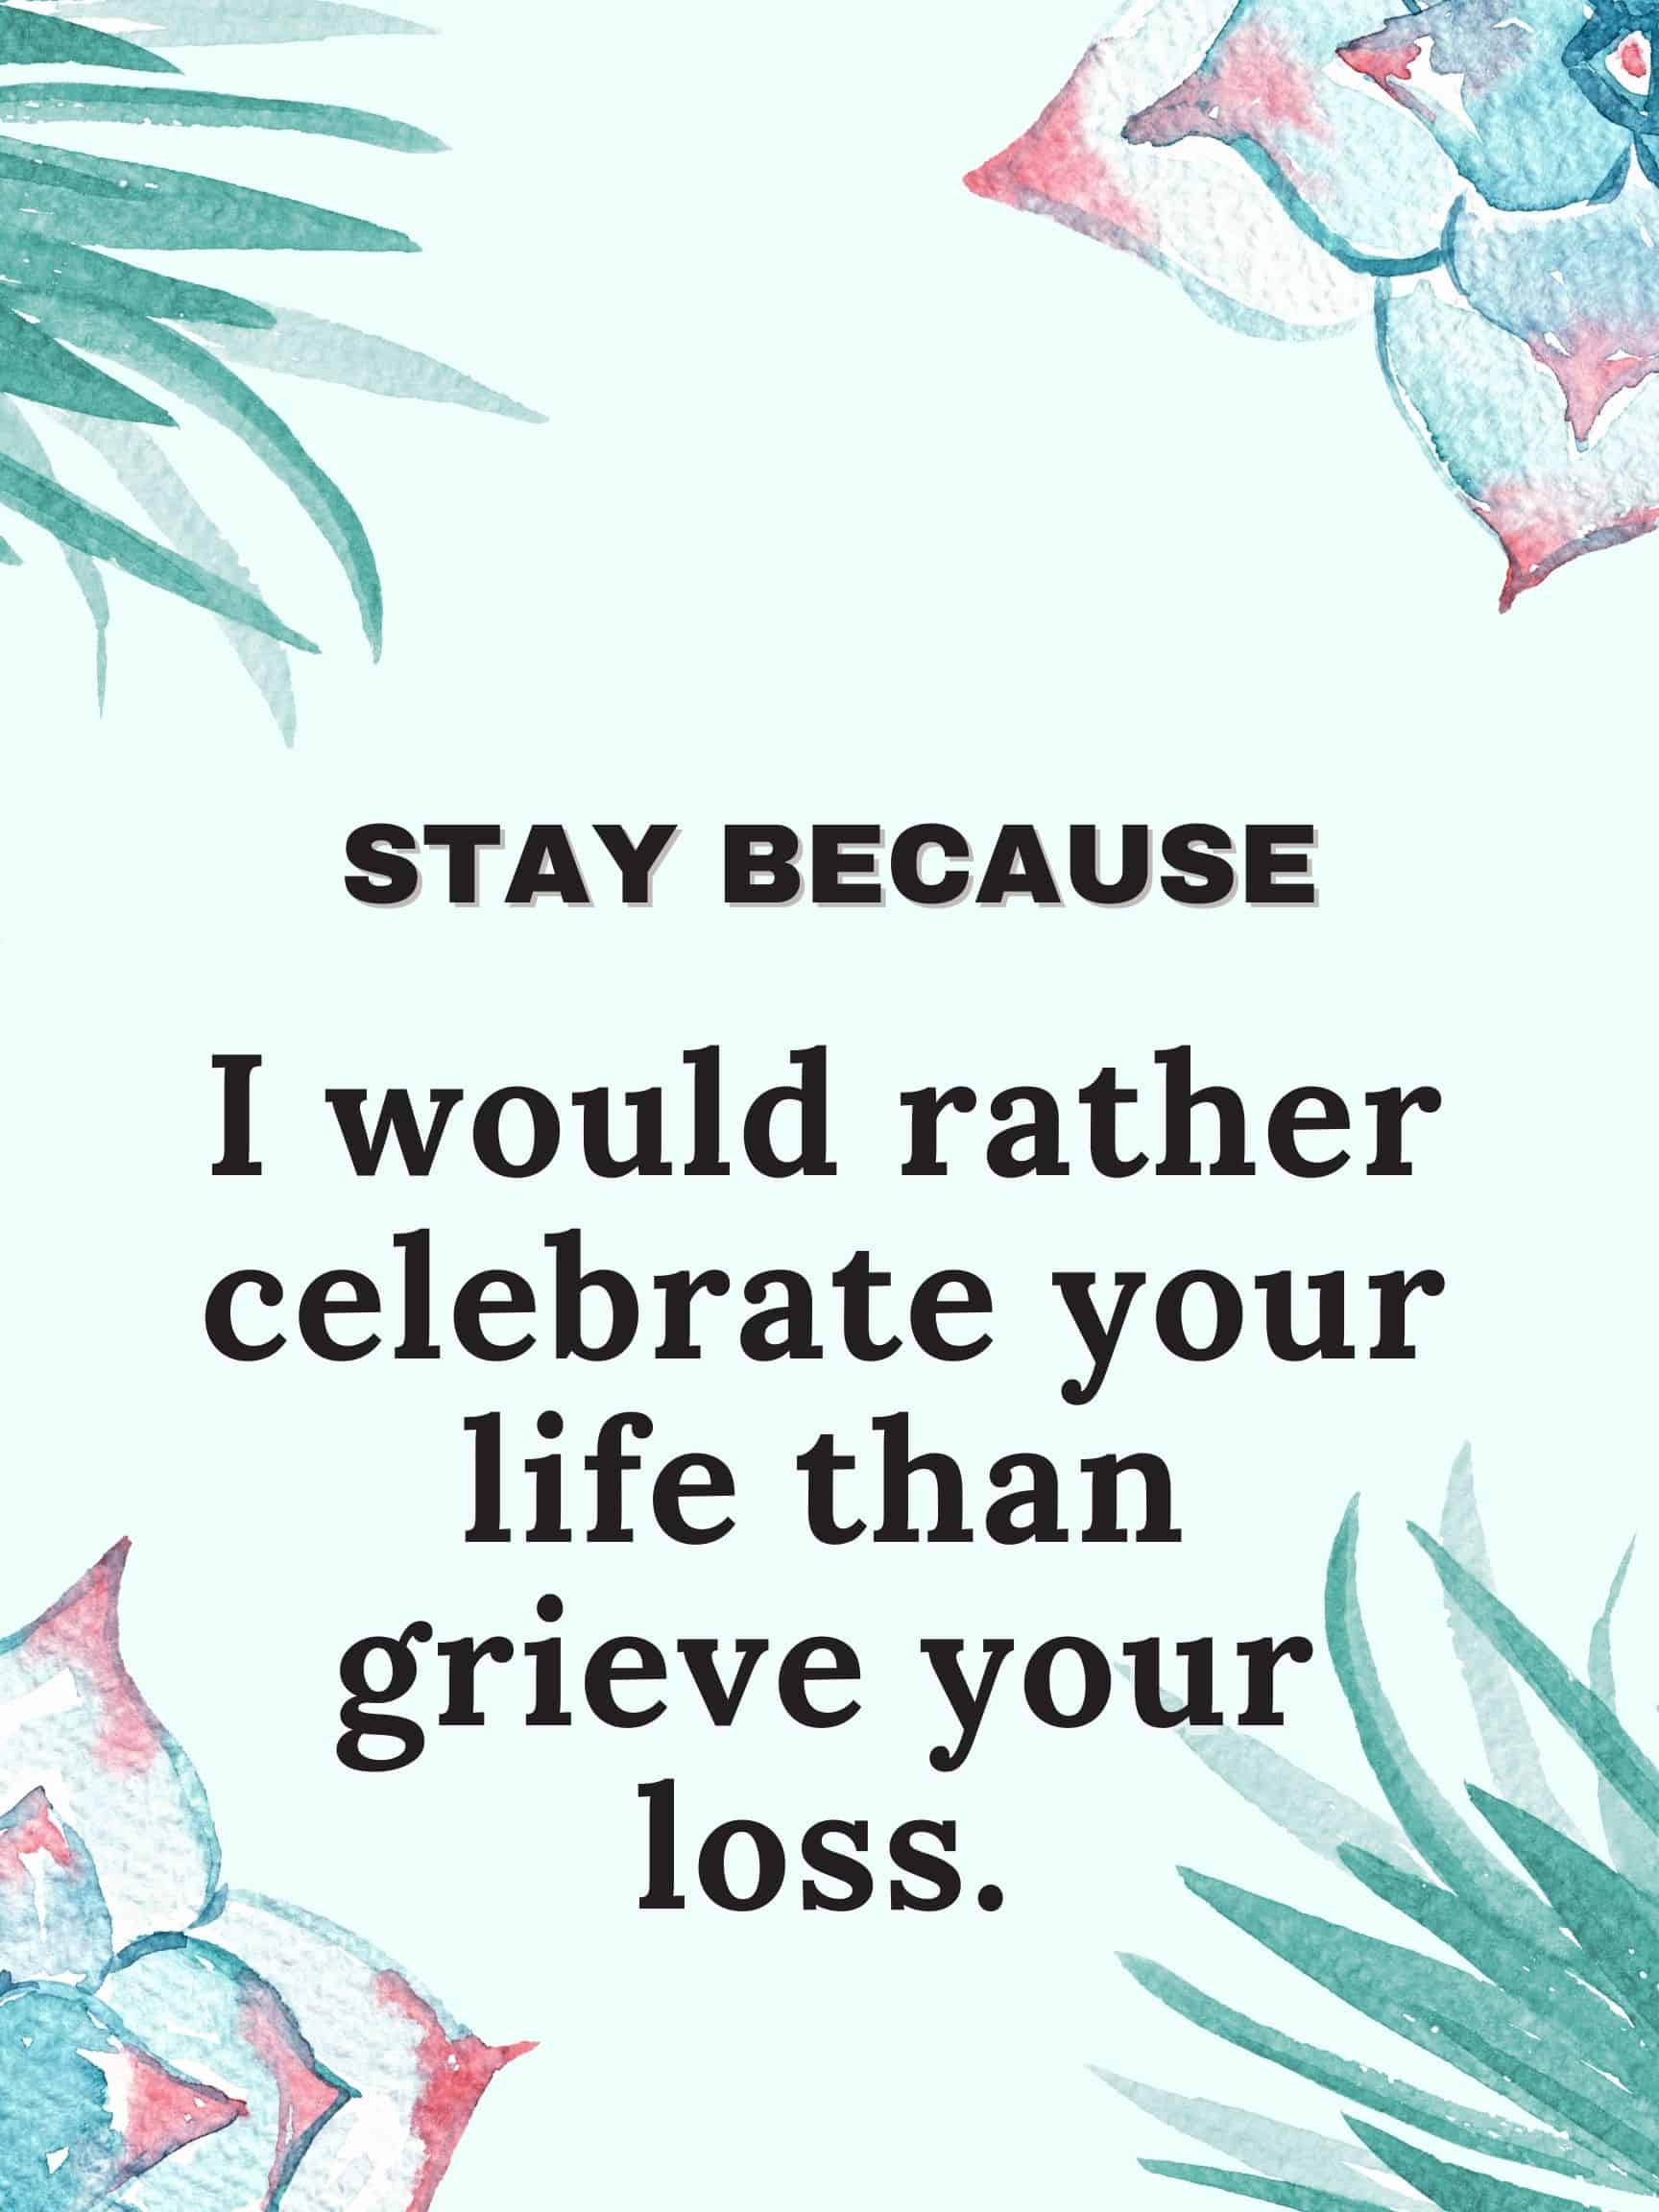 Stay because I would rather celebrate your life than grieve your loss. #StayBecause